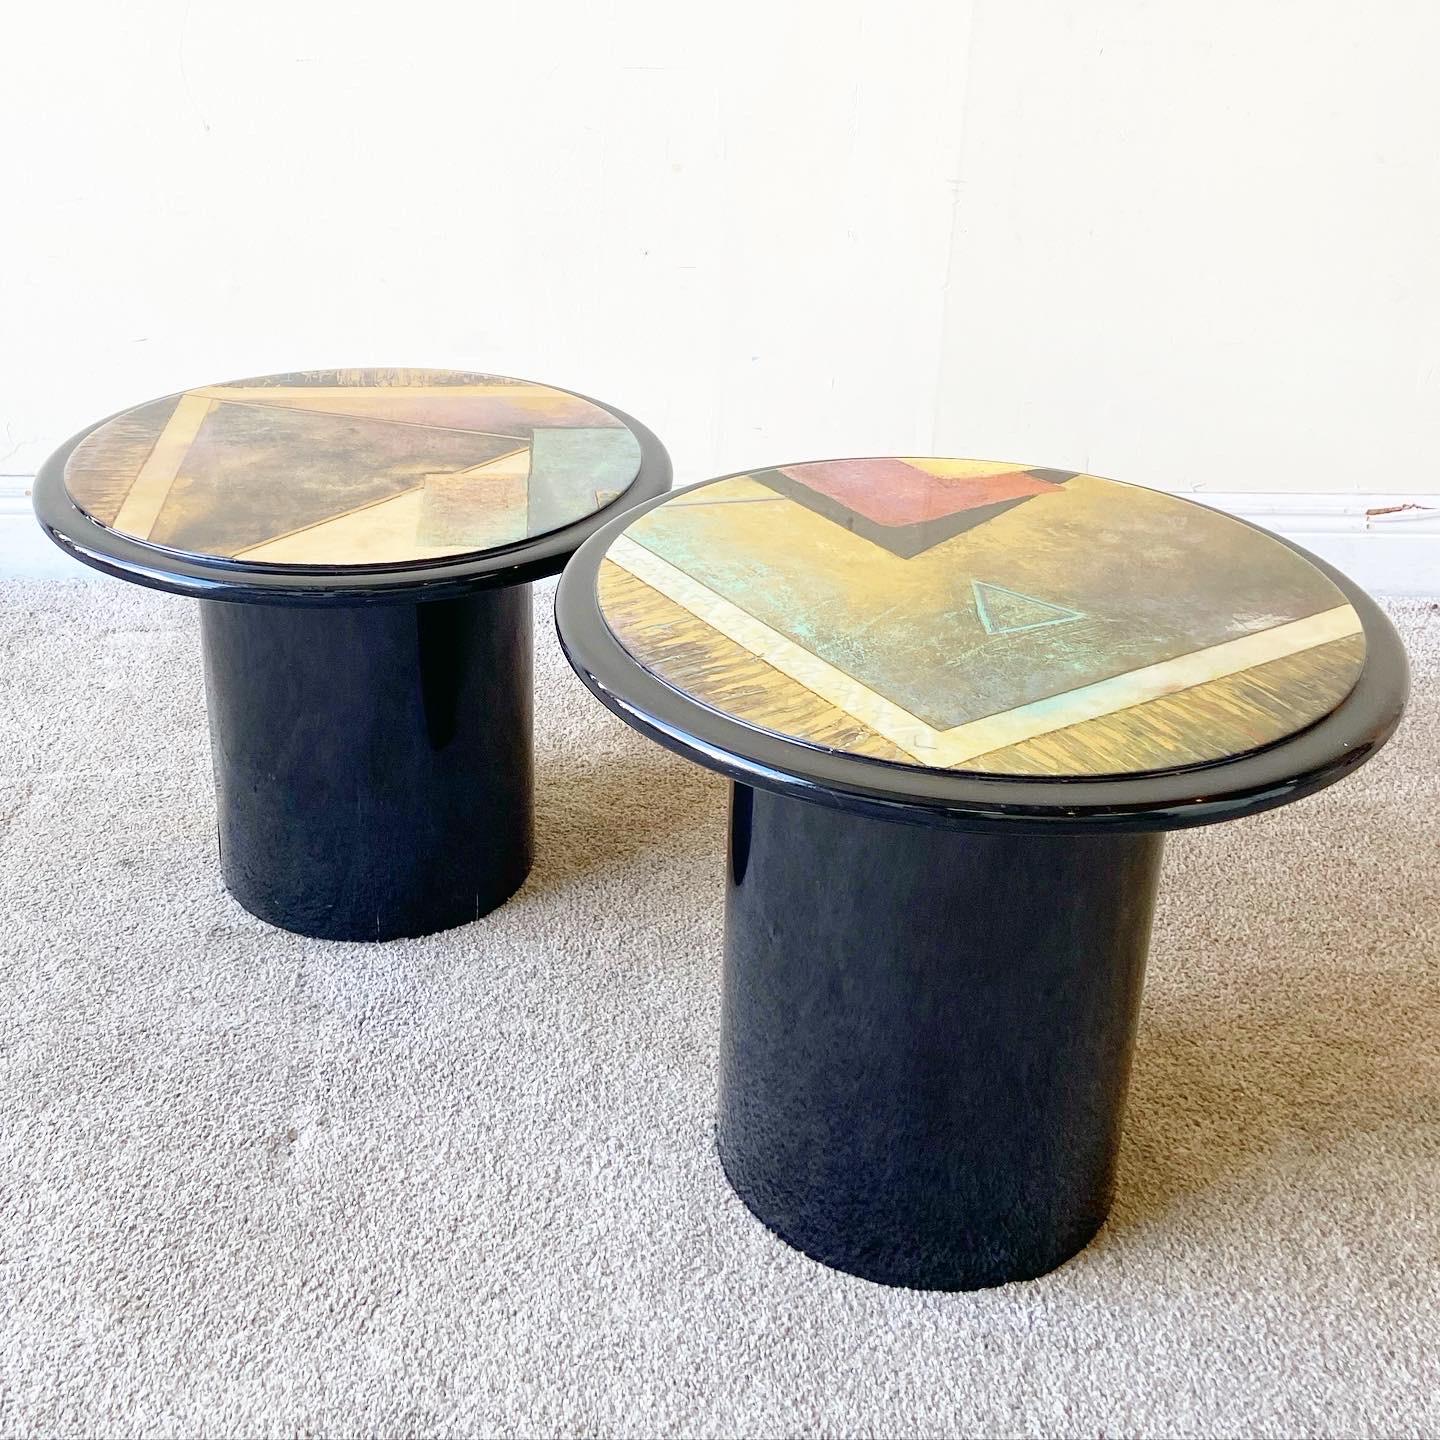 Art Deco Postmodern Circular Black Lacquered and Painted Mushroom Side Tables - a Pair For Sale